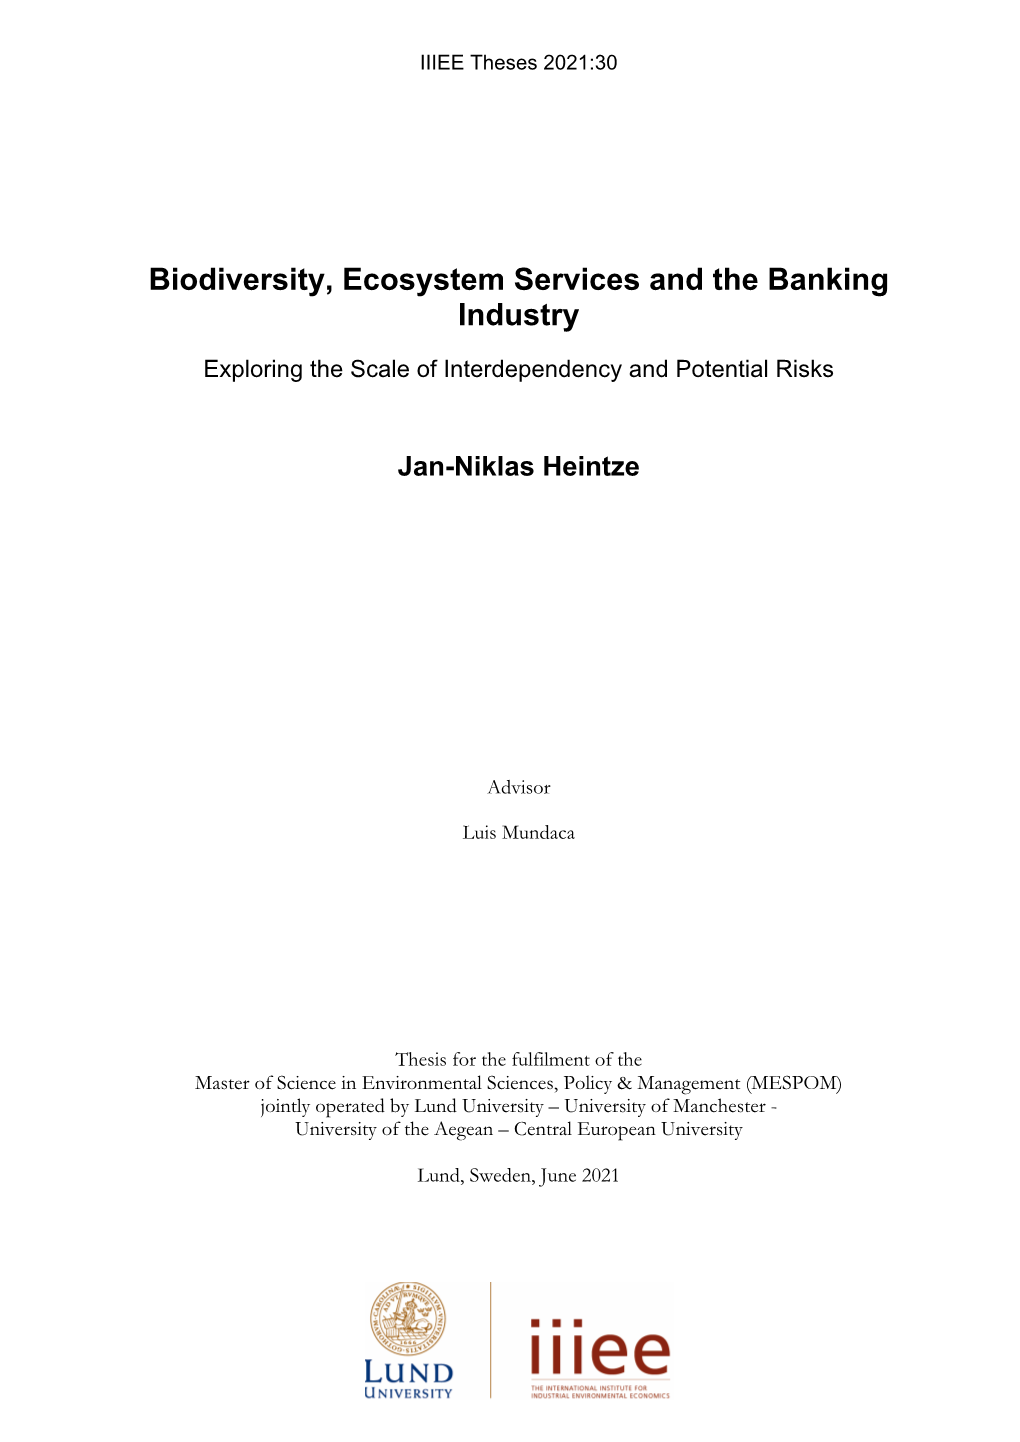 Biodiversity, Ecosystem Services and the Banking Industry